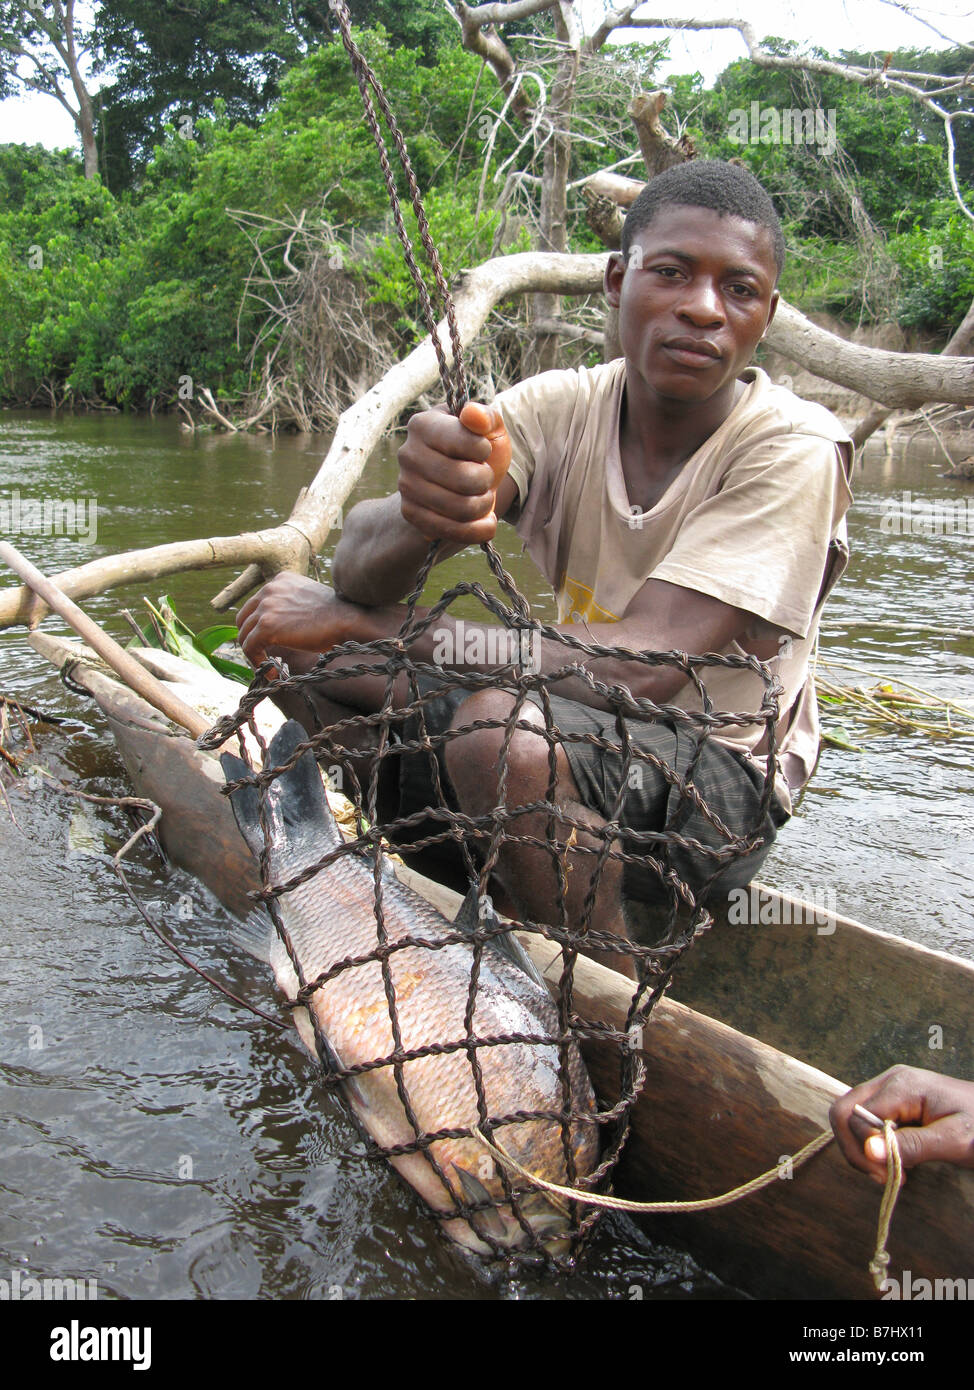 Congo River fisherman in dugout canoe with a Carp or sucking fish in spring  snared fish trap Democratic Republic of Congo Stock Photo - Alamy